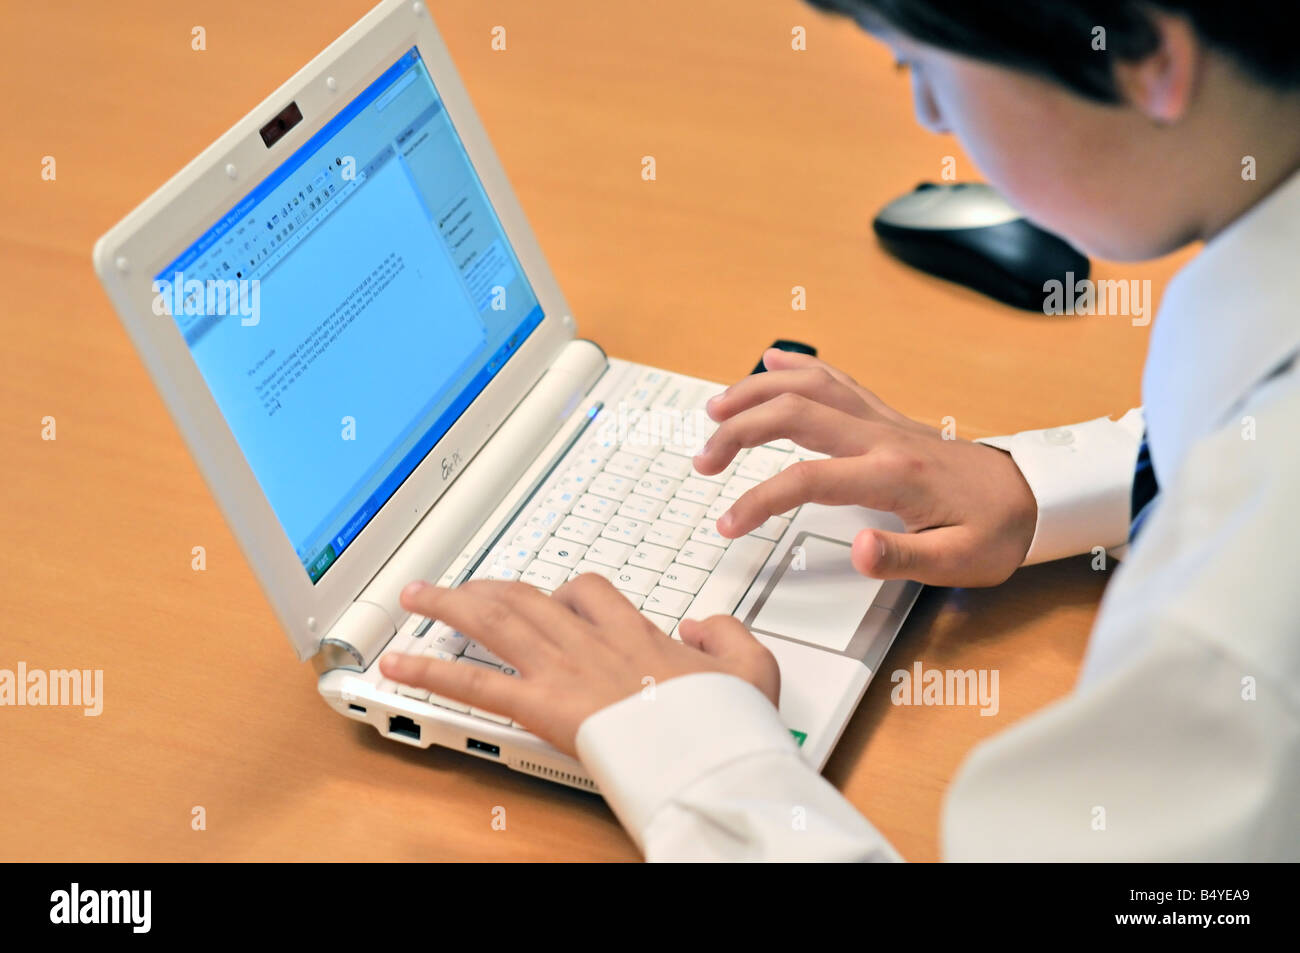 Ten year old schoolboy using an ASUS Eee PC sub notebook computer running Windows XP Stock Photo